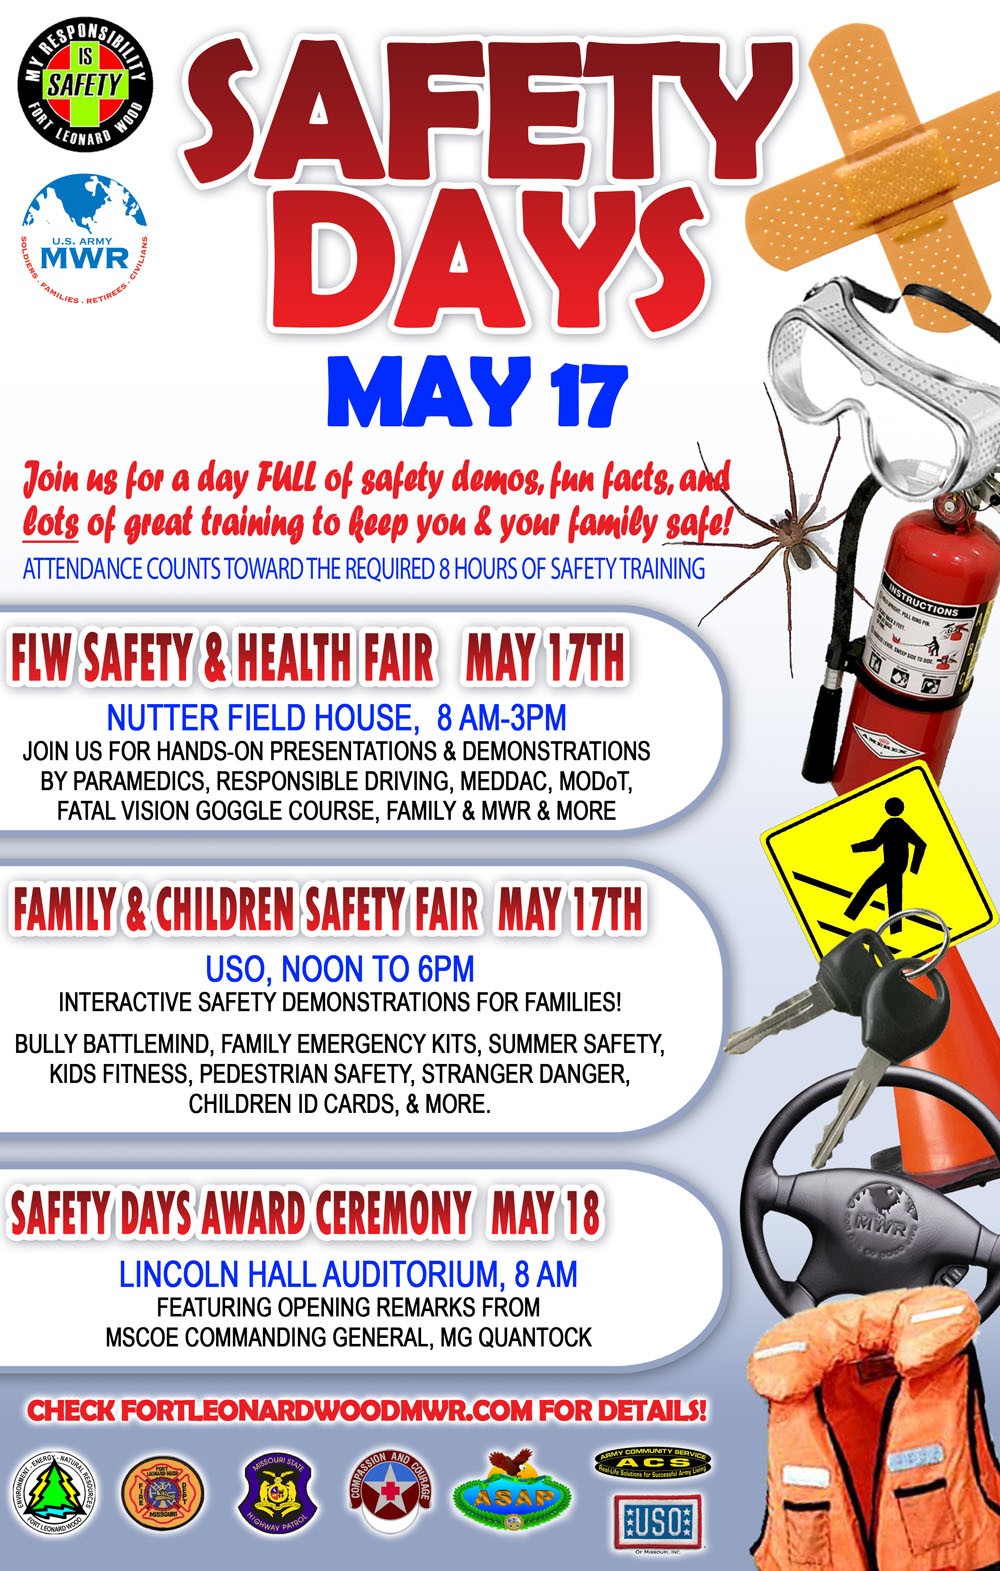 Annual safety and health fair at FLW Article The United States Army